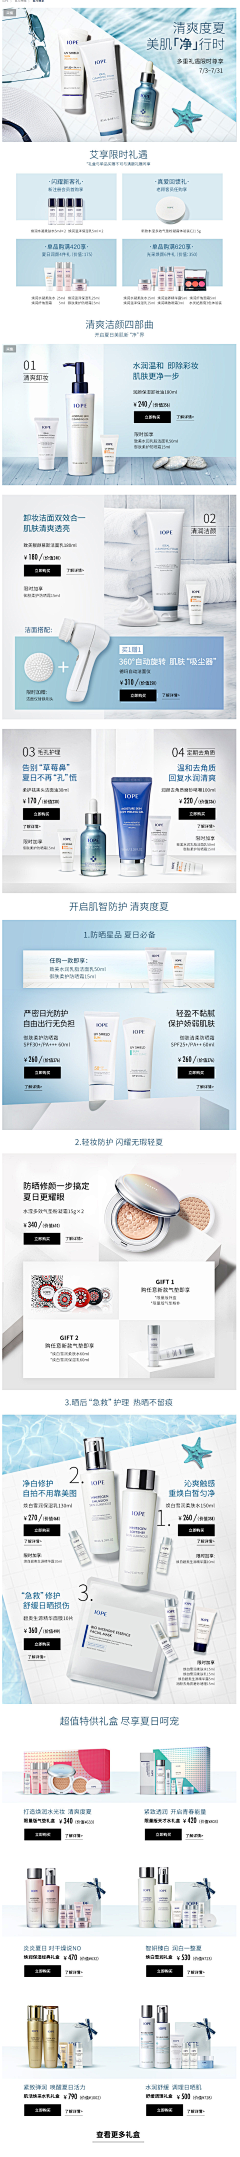 Linghao1采集到cosmetic page